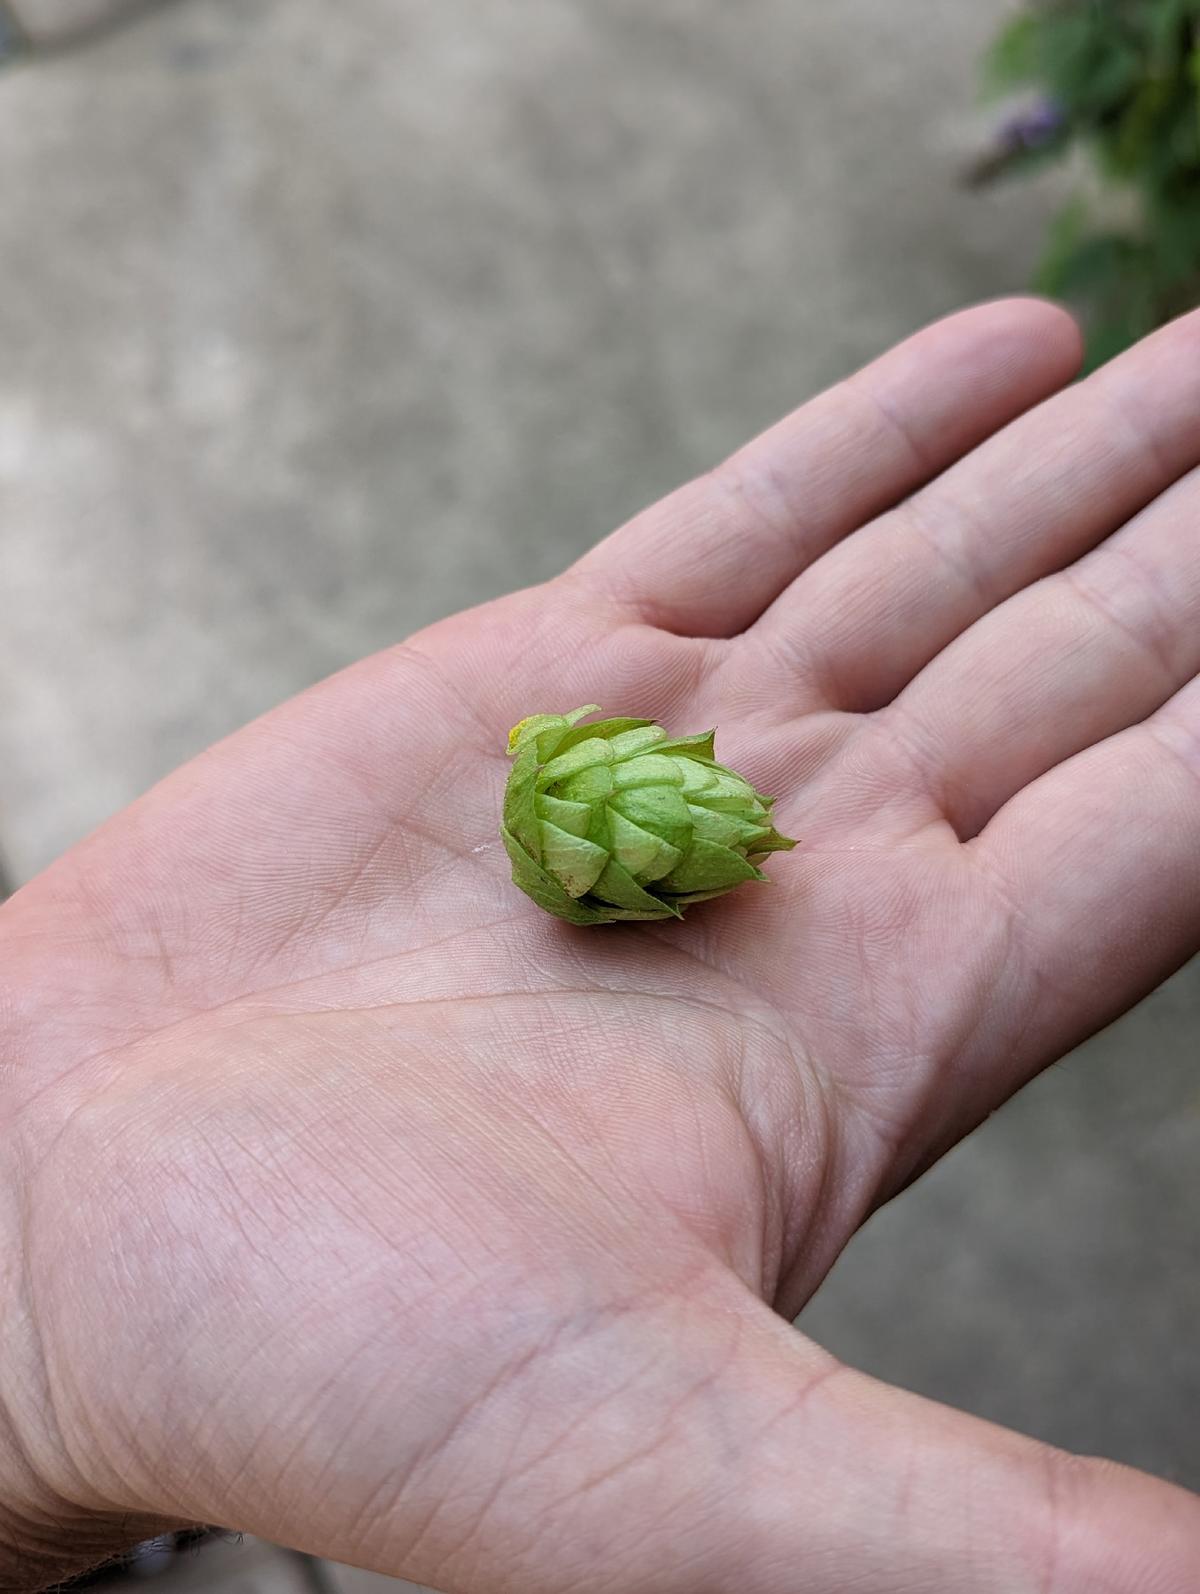 Hop is the plant, and hops are the flowers that give beer its bitter taste and fruity flavors. (Courtesy of Athena Lucero)